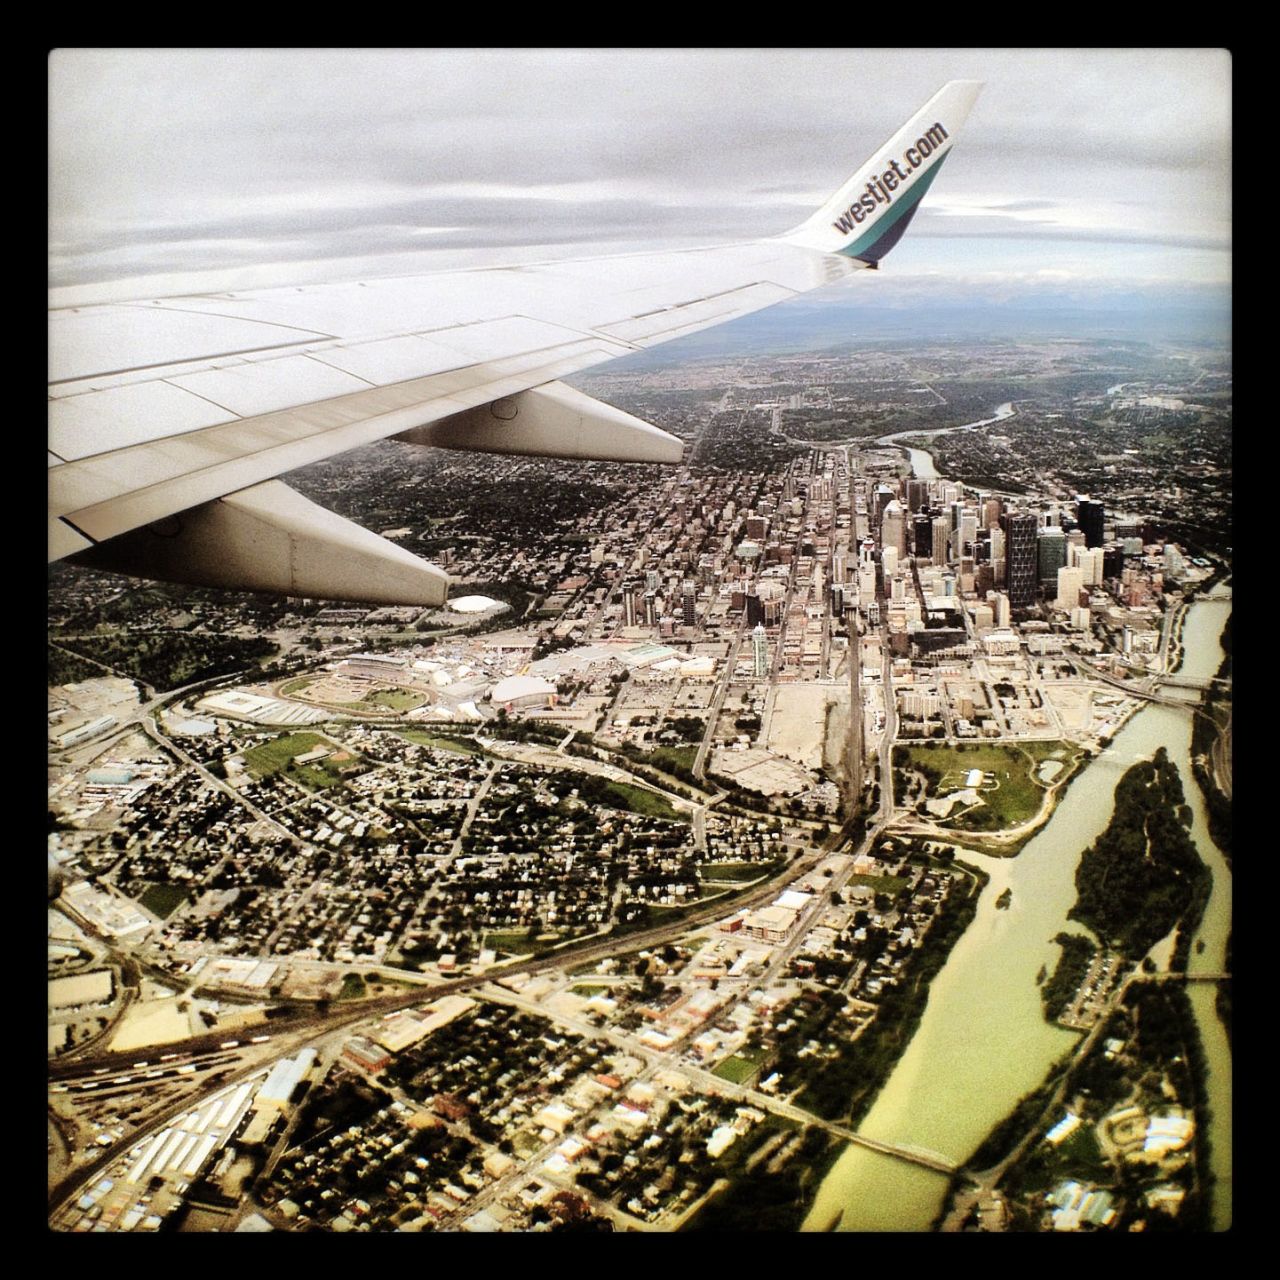 Alvarez took this shot in Calgary on his way to see New York for the first time.